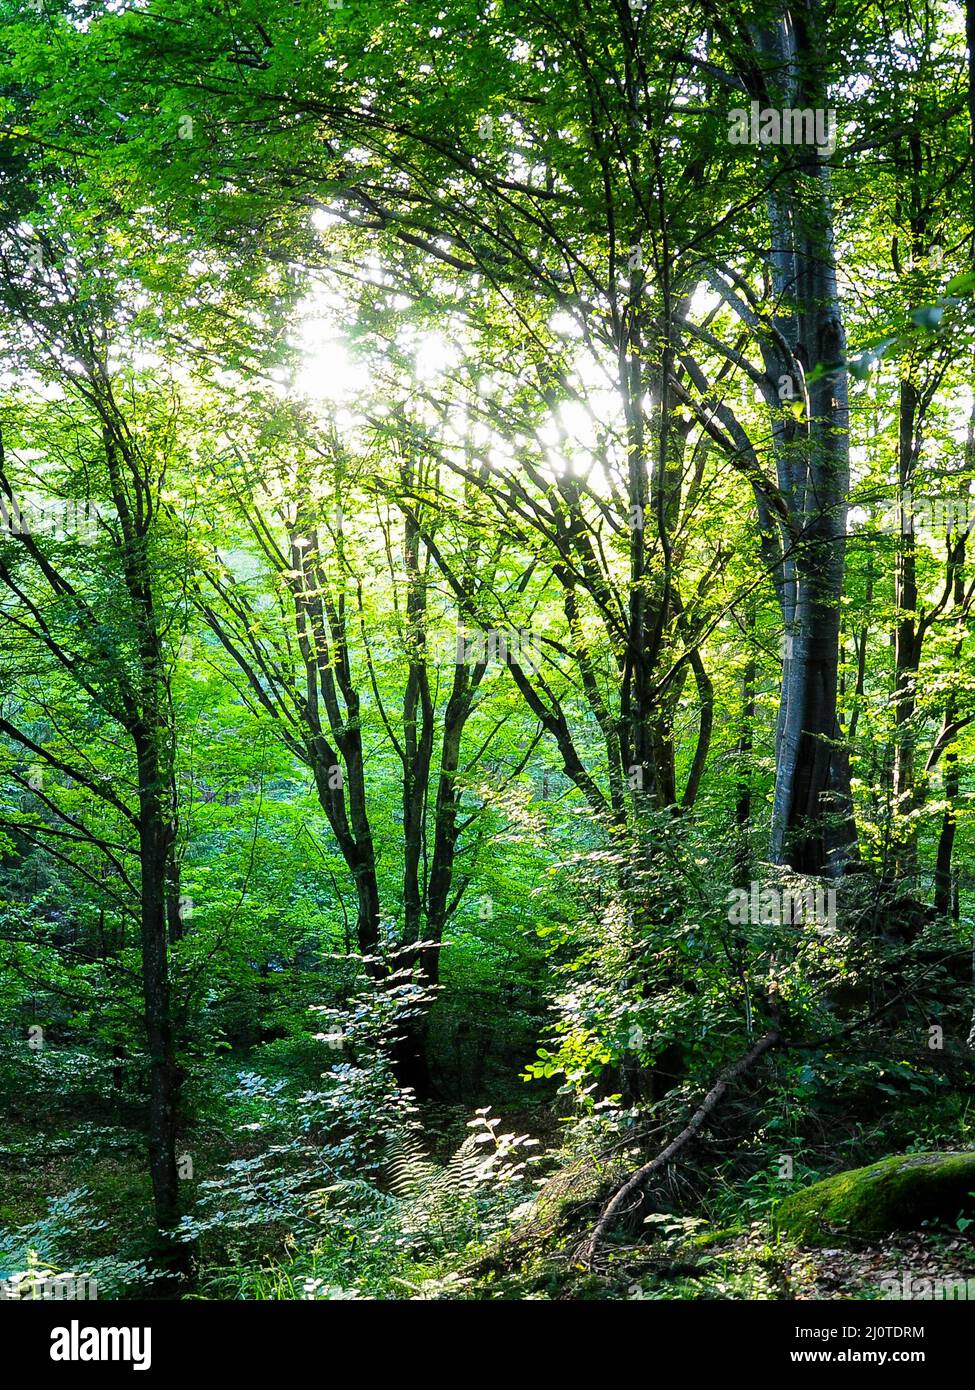 Sunlight penetrating a wild beech forest in Fagaras Mountains, Carpathia, Romania. Summer season. The forest is all green and full of luxuriant plants Stock Photo